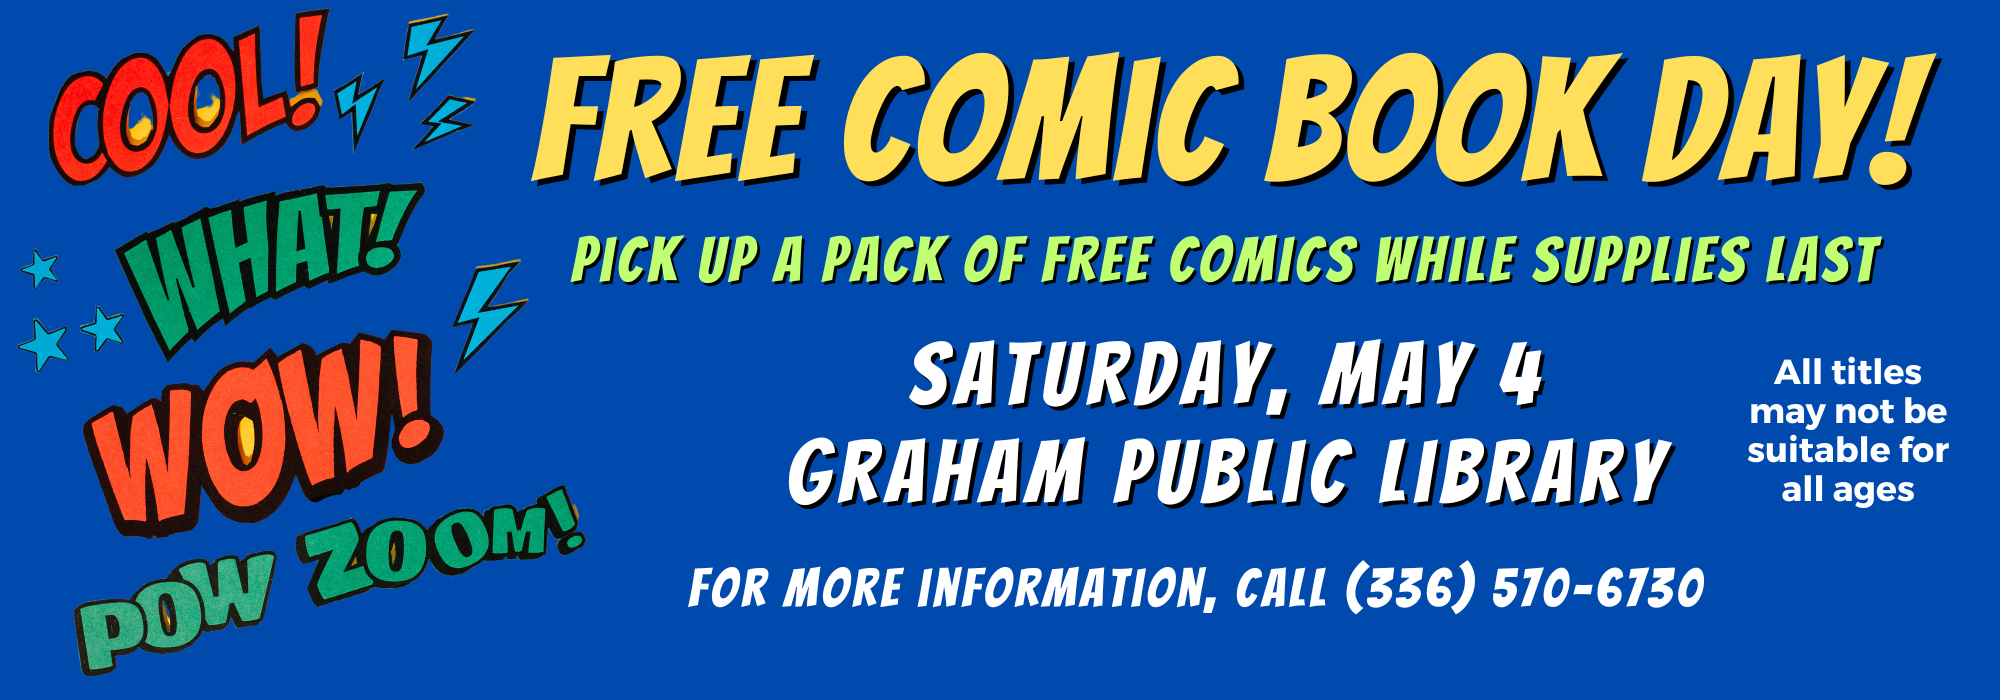 5.4 All Day - Free Comic Book Day! at Graham